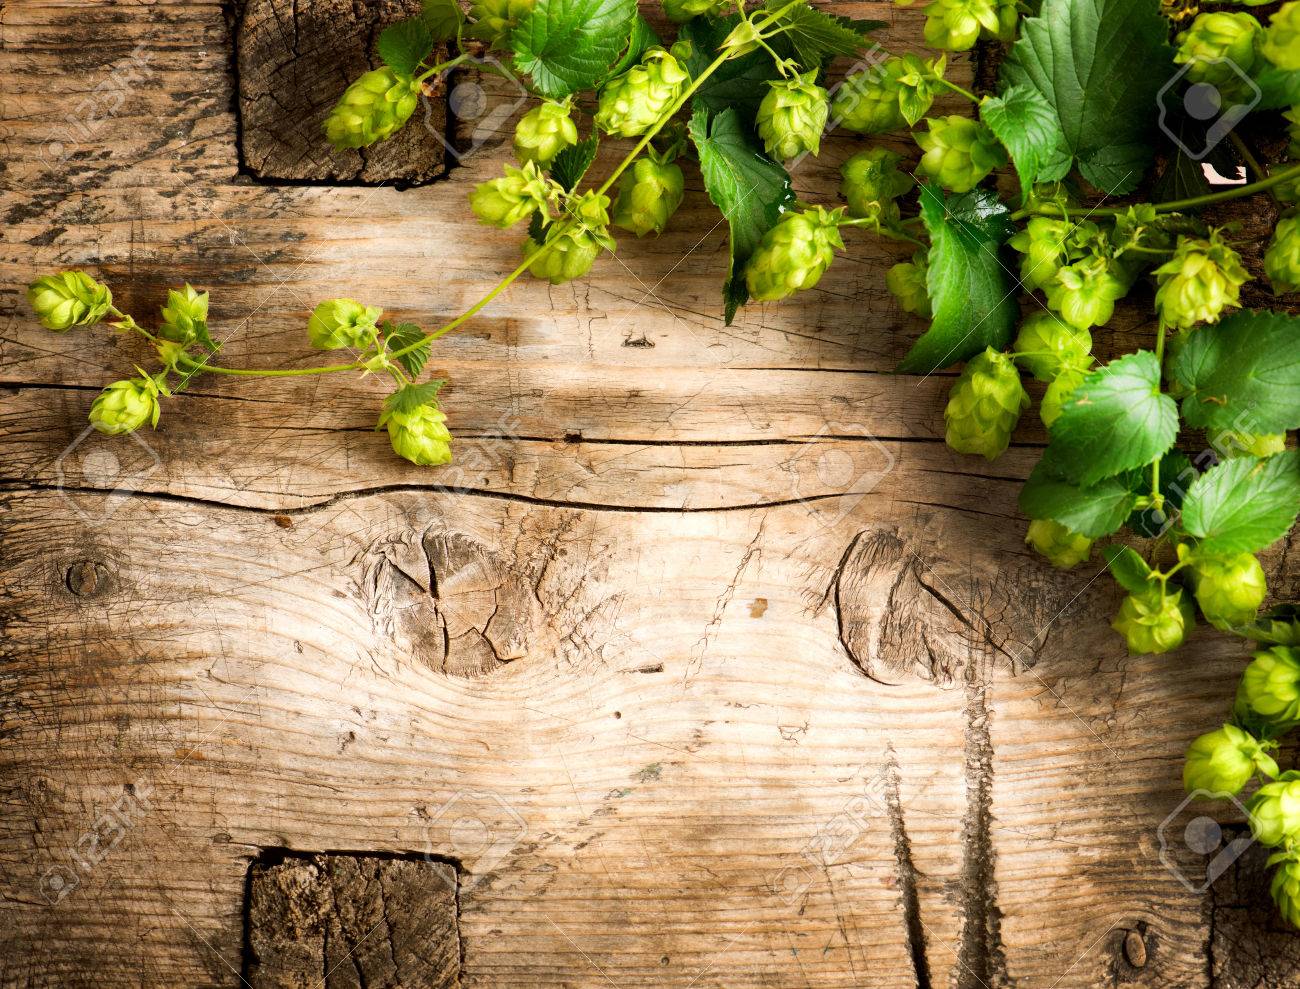 Hop Plant Border Design Twigs Of Hops Over Wooden Cracked Table